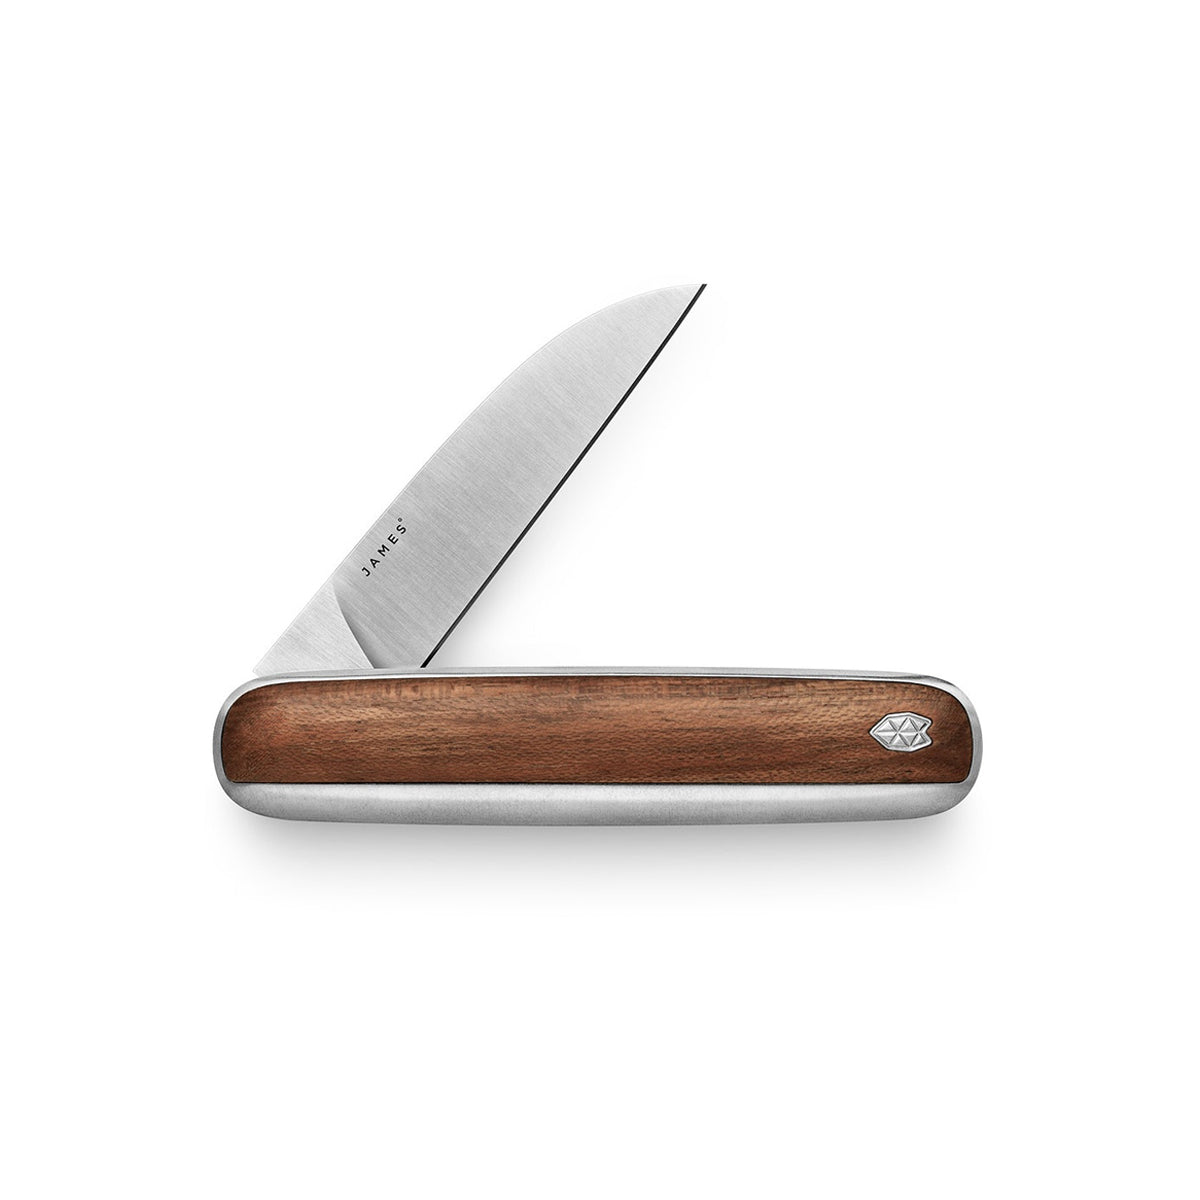 THE PIKE - ROSEWOOD & STAINLESS